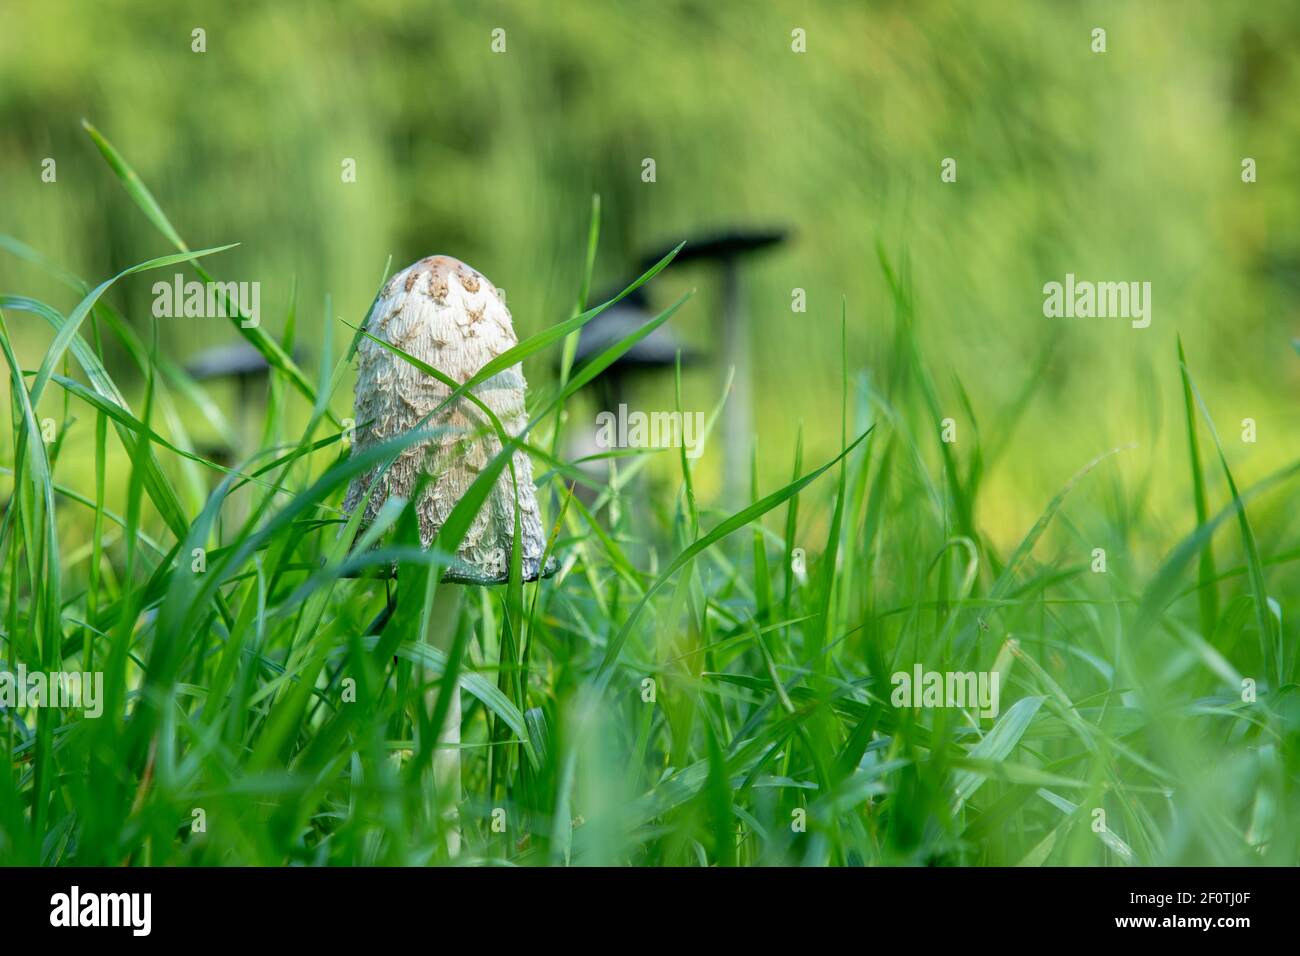 Group of edible mushrooms, Soprinus lat., in mature stage similar to toadstools in the grass, close up Stock Photo